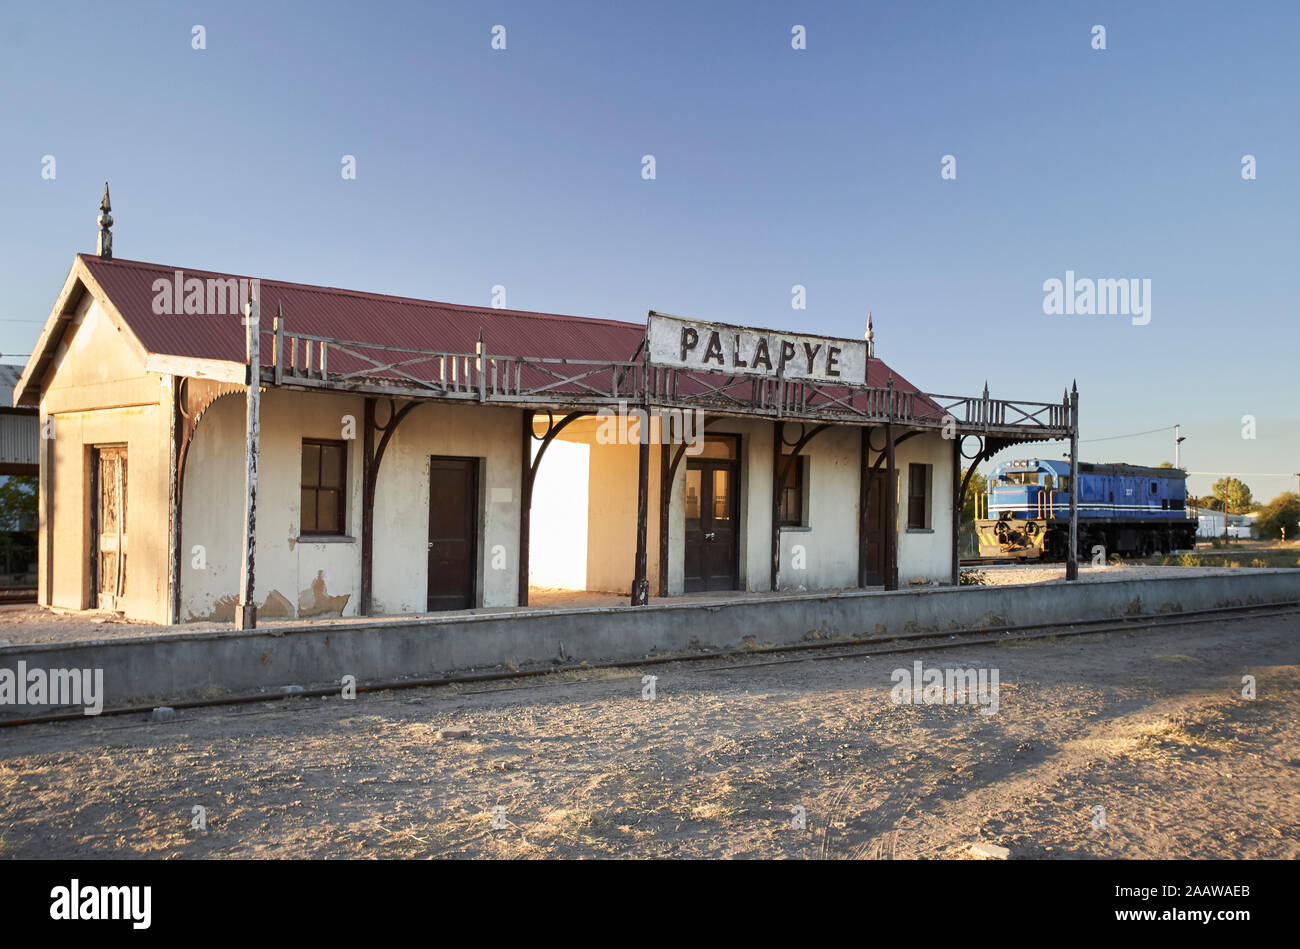 Old train station against clear sky. Palapye, Botswana Stock Photo